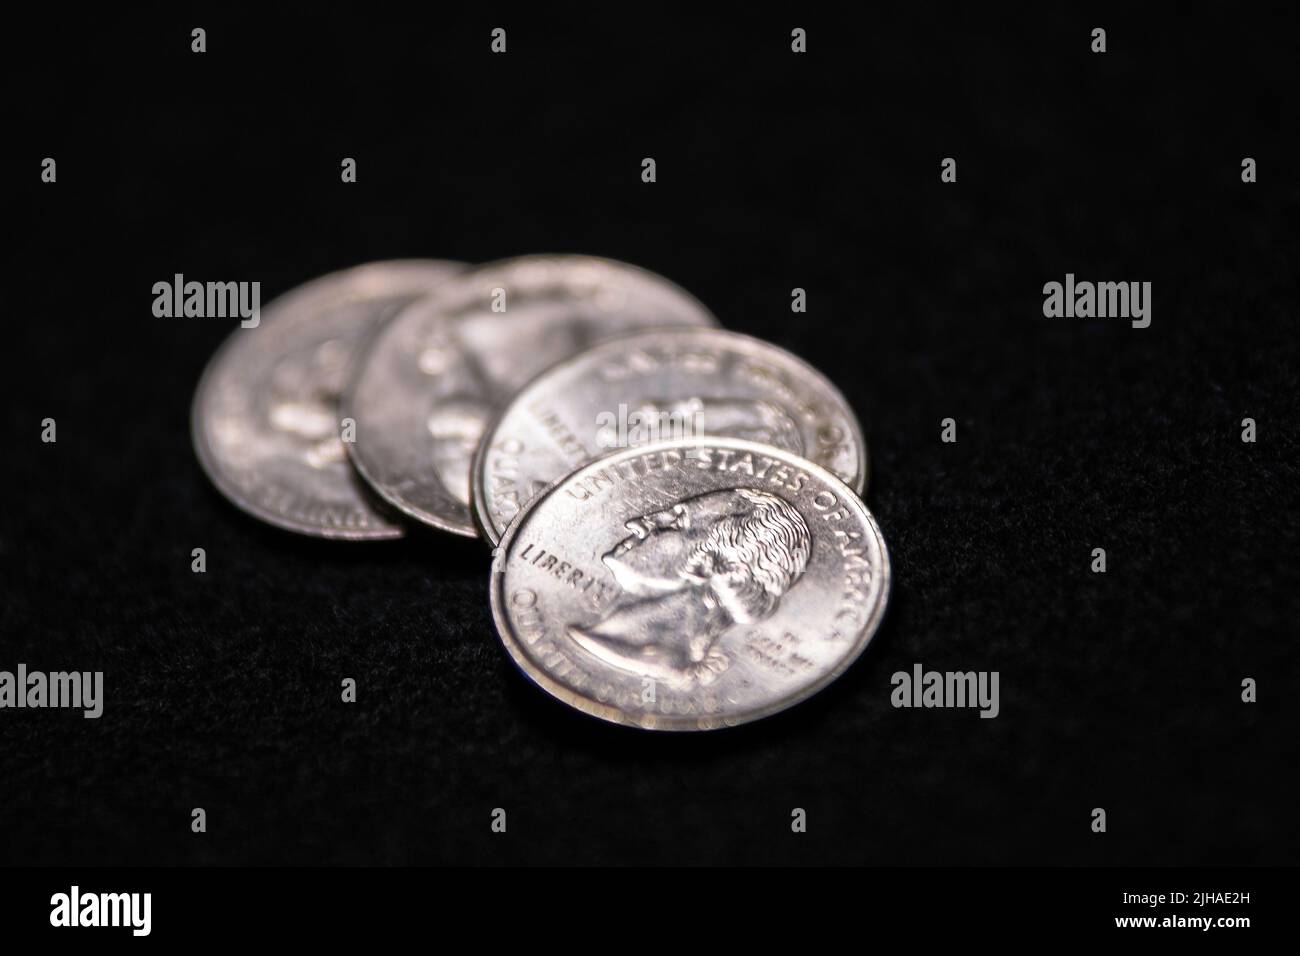 Shallow focus on one United States Quarter loosely stacked on three others that are out-of-focus on a black felt background with negative space. Stock Photo